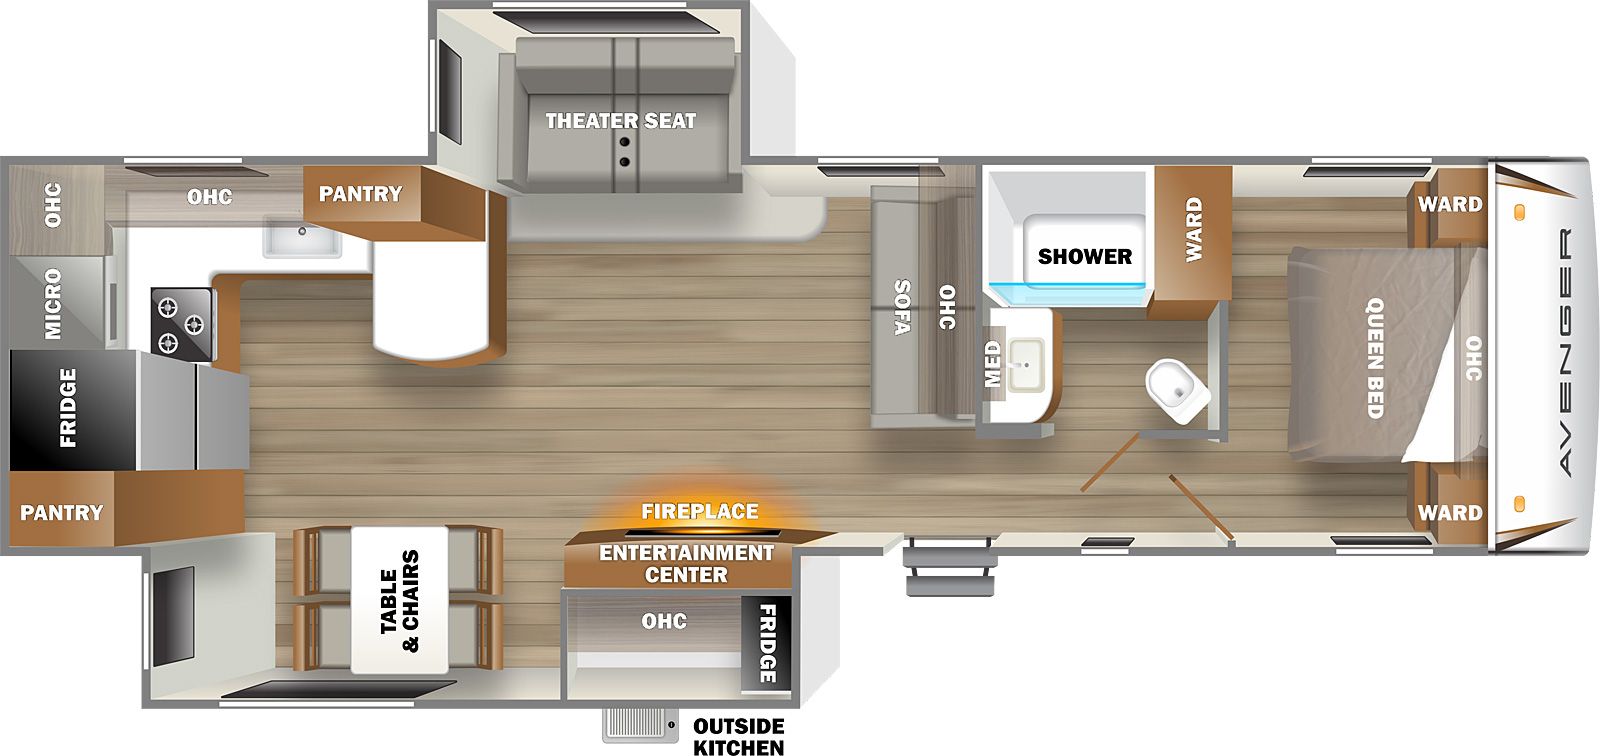 The 31RKD has a single entry door, outdoor kitchen, and two awnings that are 9' and 13' on the outside. Inside, there is a queen bedroom in the front of the unit with wardrobe cabinets and room to stand on either side of the bed. There is a tall wardrobe cabinet in the corner and additional cabinets mounted over the head of the bed. The bedroom door opens to a hallway leading to the main living area. On the right side of the hallway is the bathroom containing a sink with medicine cabinet, shower, and commode. On the outside bathroom wall is a sofa and overhead cabinets mounted perpendicular to the length of the unit and pointed toward the rear. On the left is a slide room containing an entertainment center with fireplace and dinette table with four chairs. On the opposite wall is another slide out containing theater seating. The kitchen is located in the rear of the unit and contains two pantries, refrigerator, cooktop with oven, and countertop that hugs the rear right corner and along the rear right wall, then extends slightly sideways in a short peninsula. There are cabinets and a microwave oven mounted overhead. 